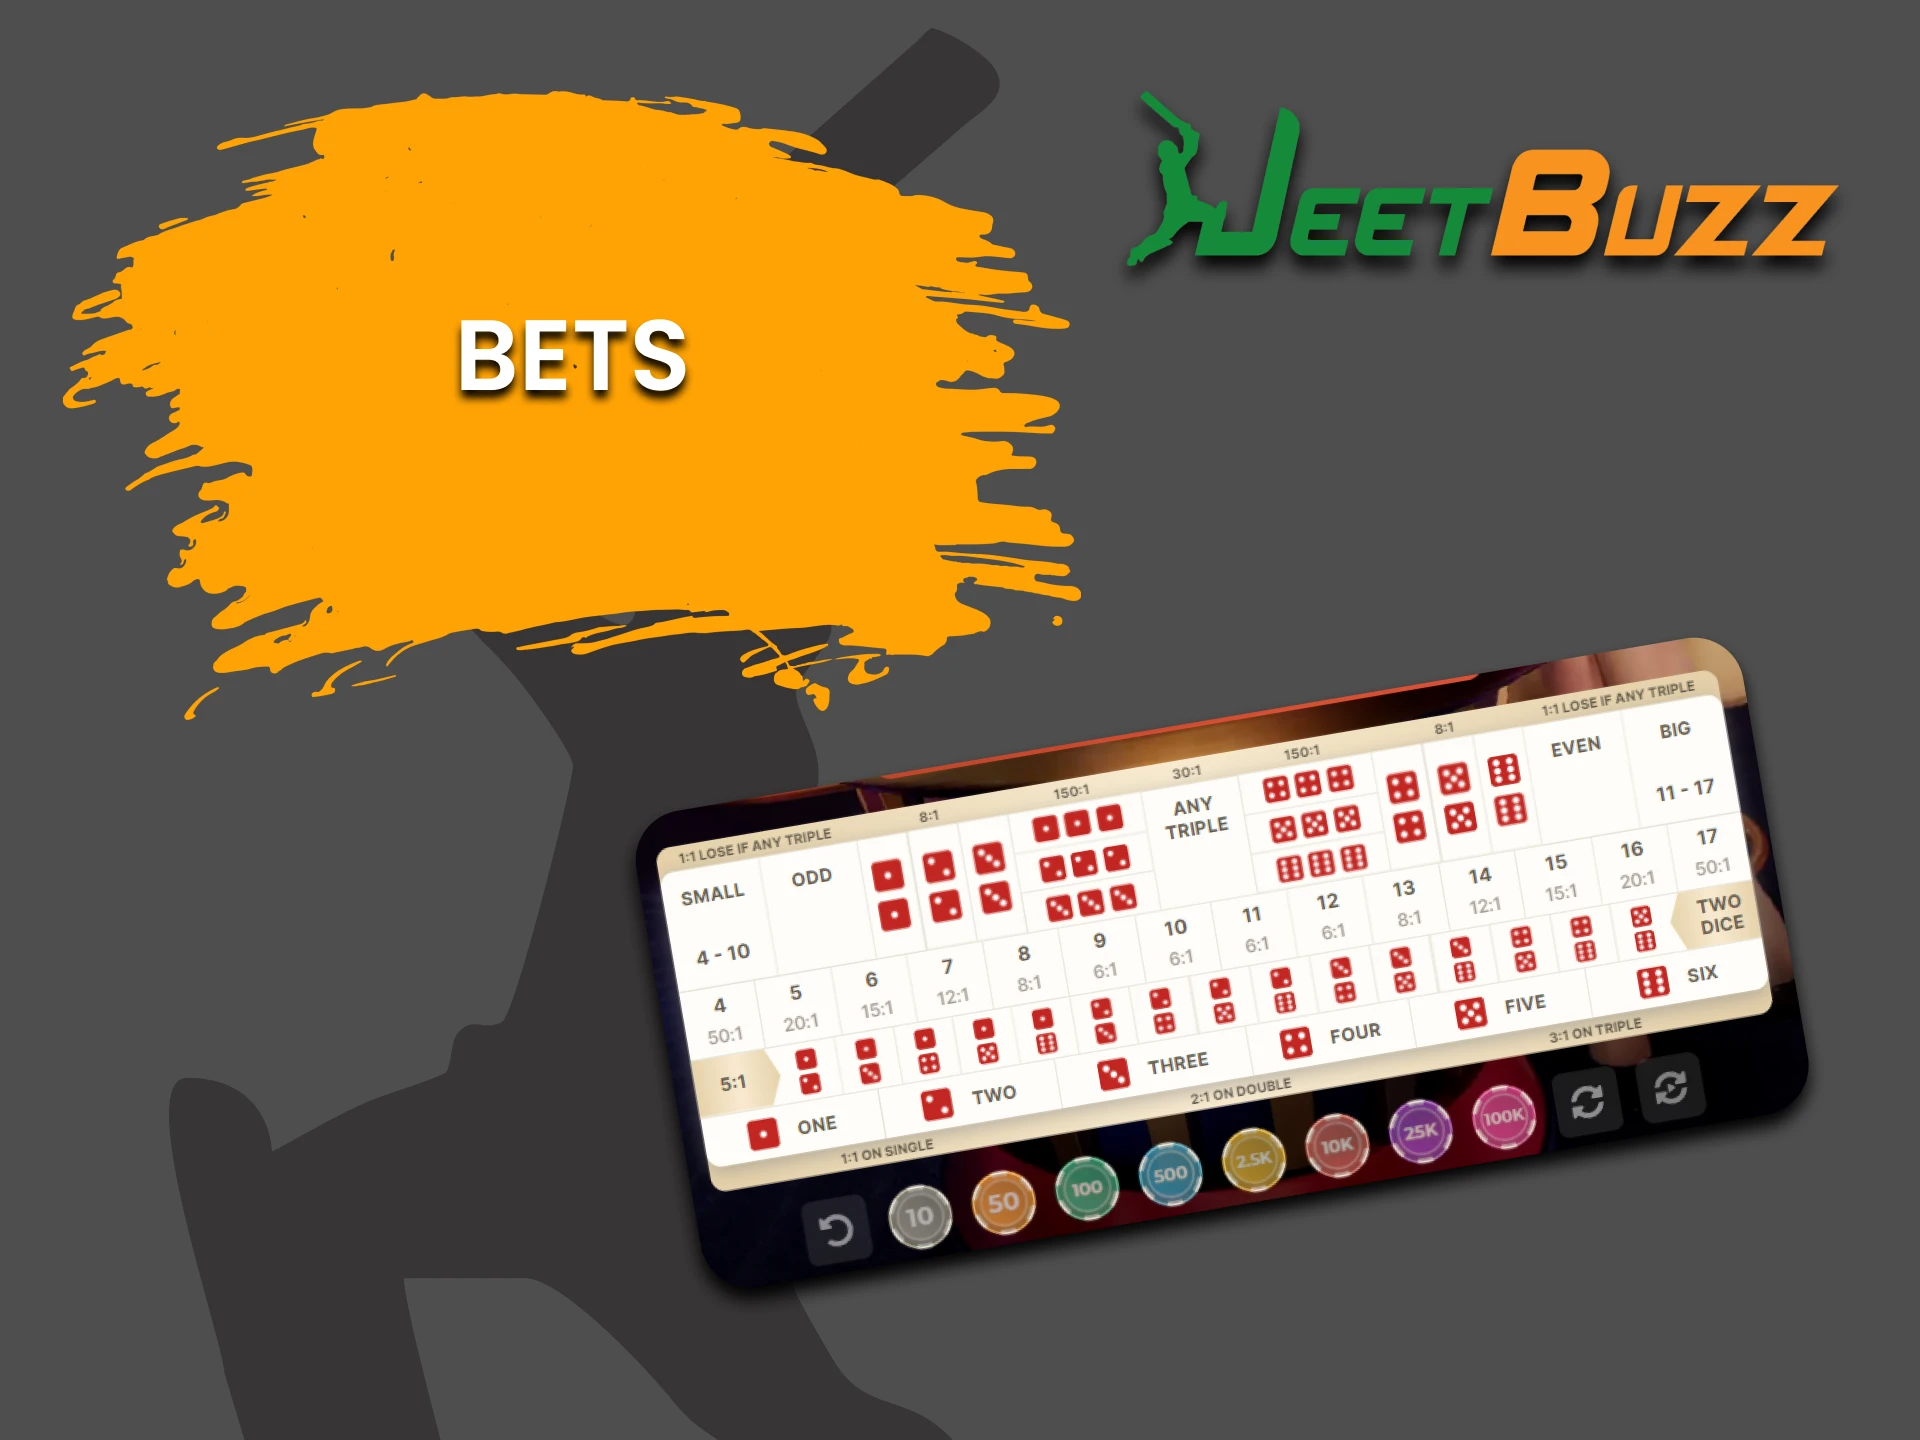 Find out how to bet on Sic Bo on Jeetbuzz.